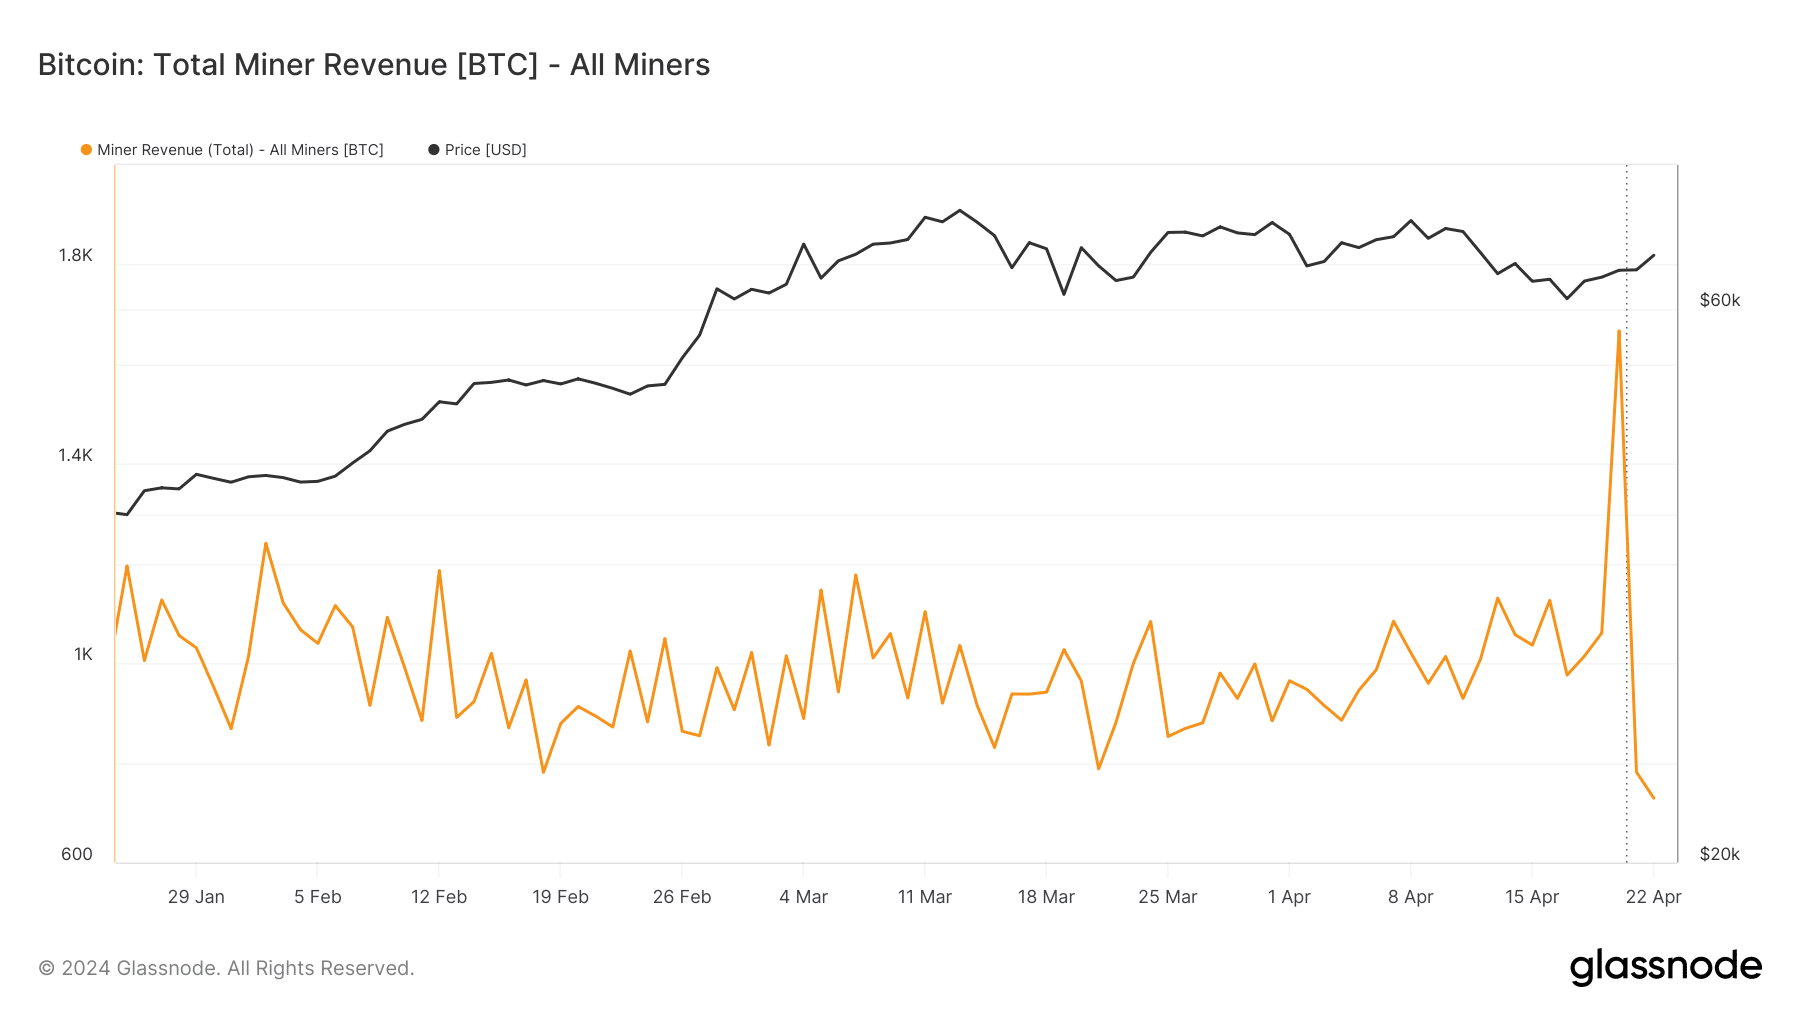 Bitcoin revenue dropping after the halving